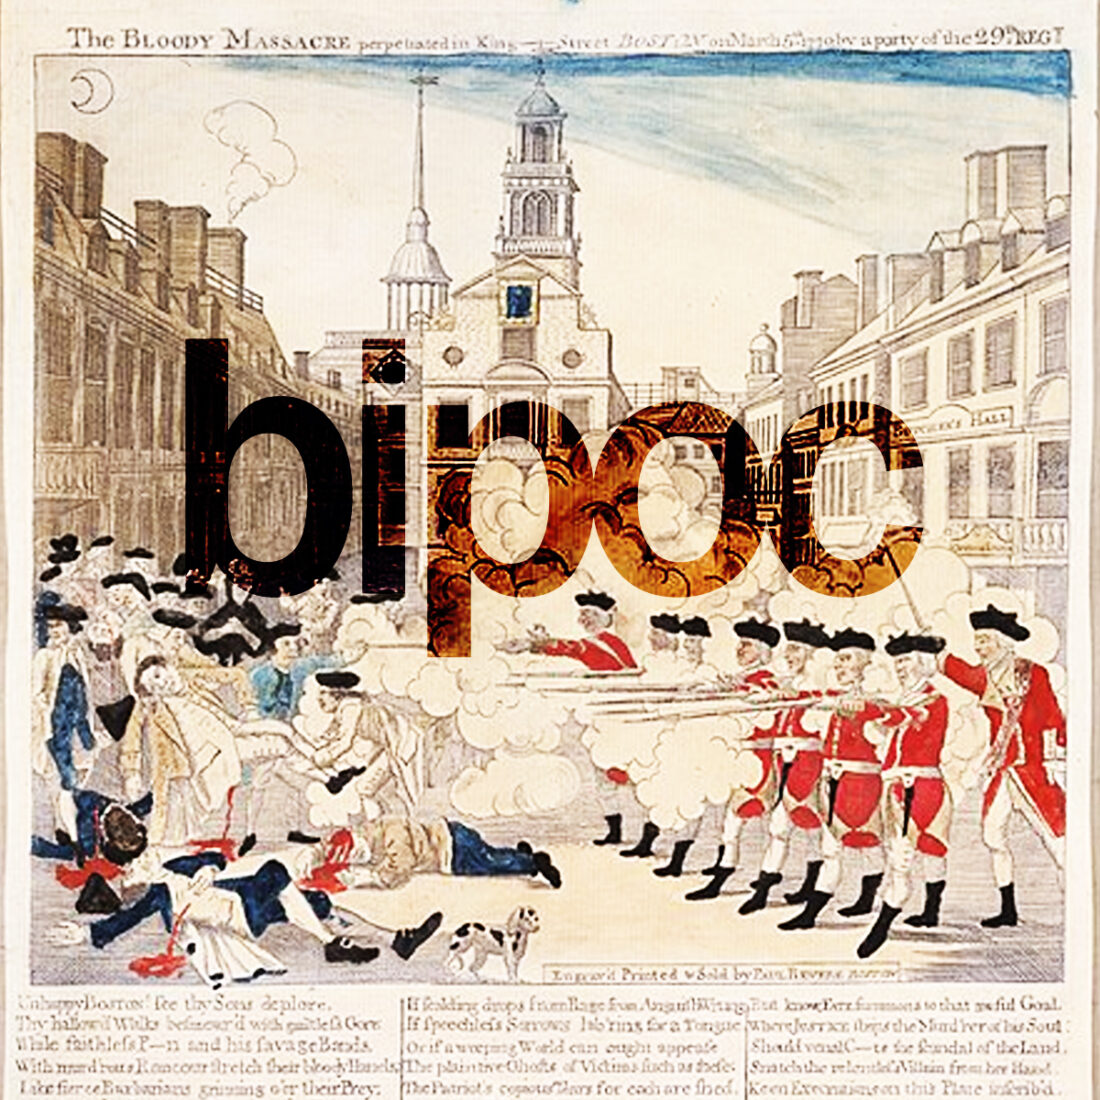 Image of Paul Revere's Boston Massacre engraving with "BIPOC" across the center in dark text.